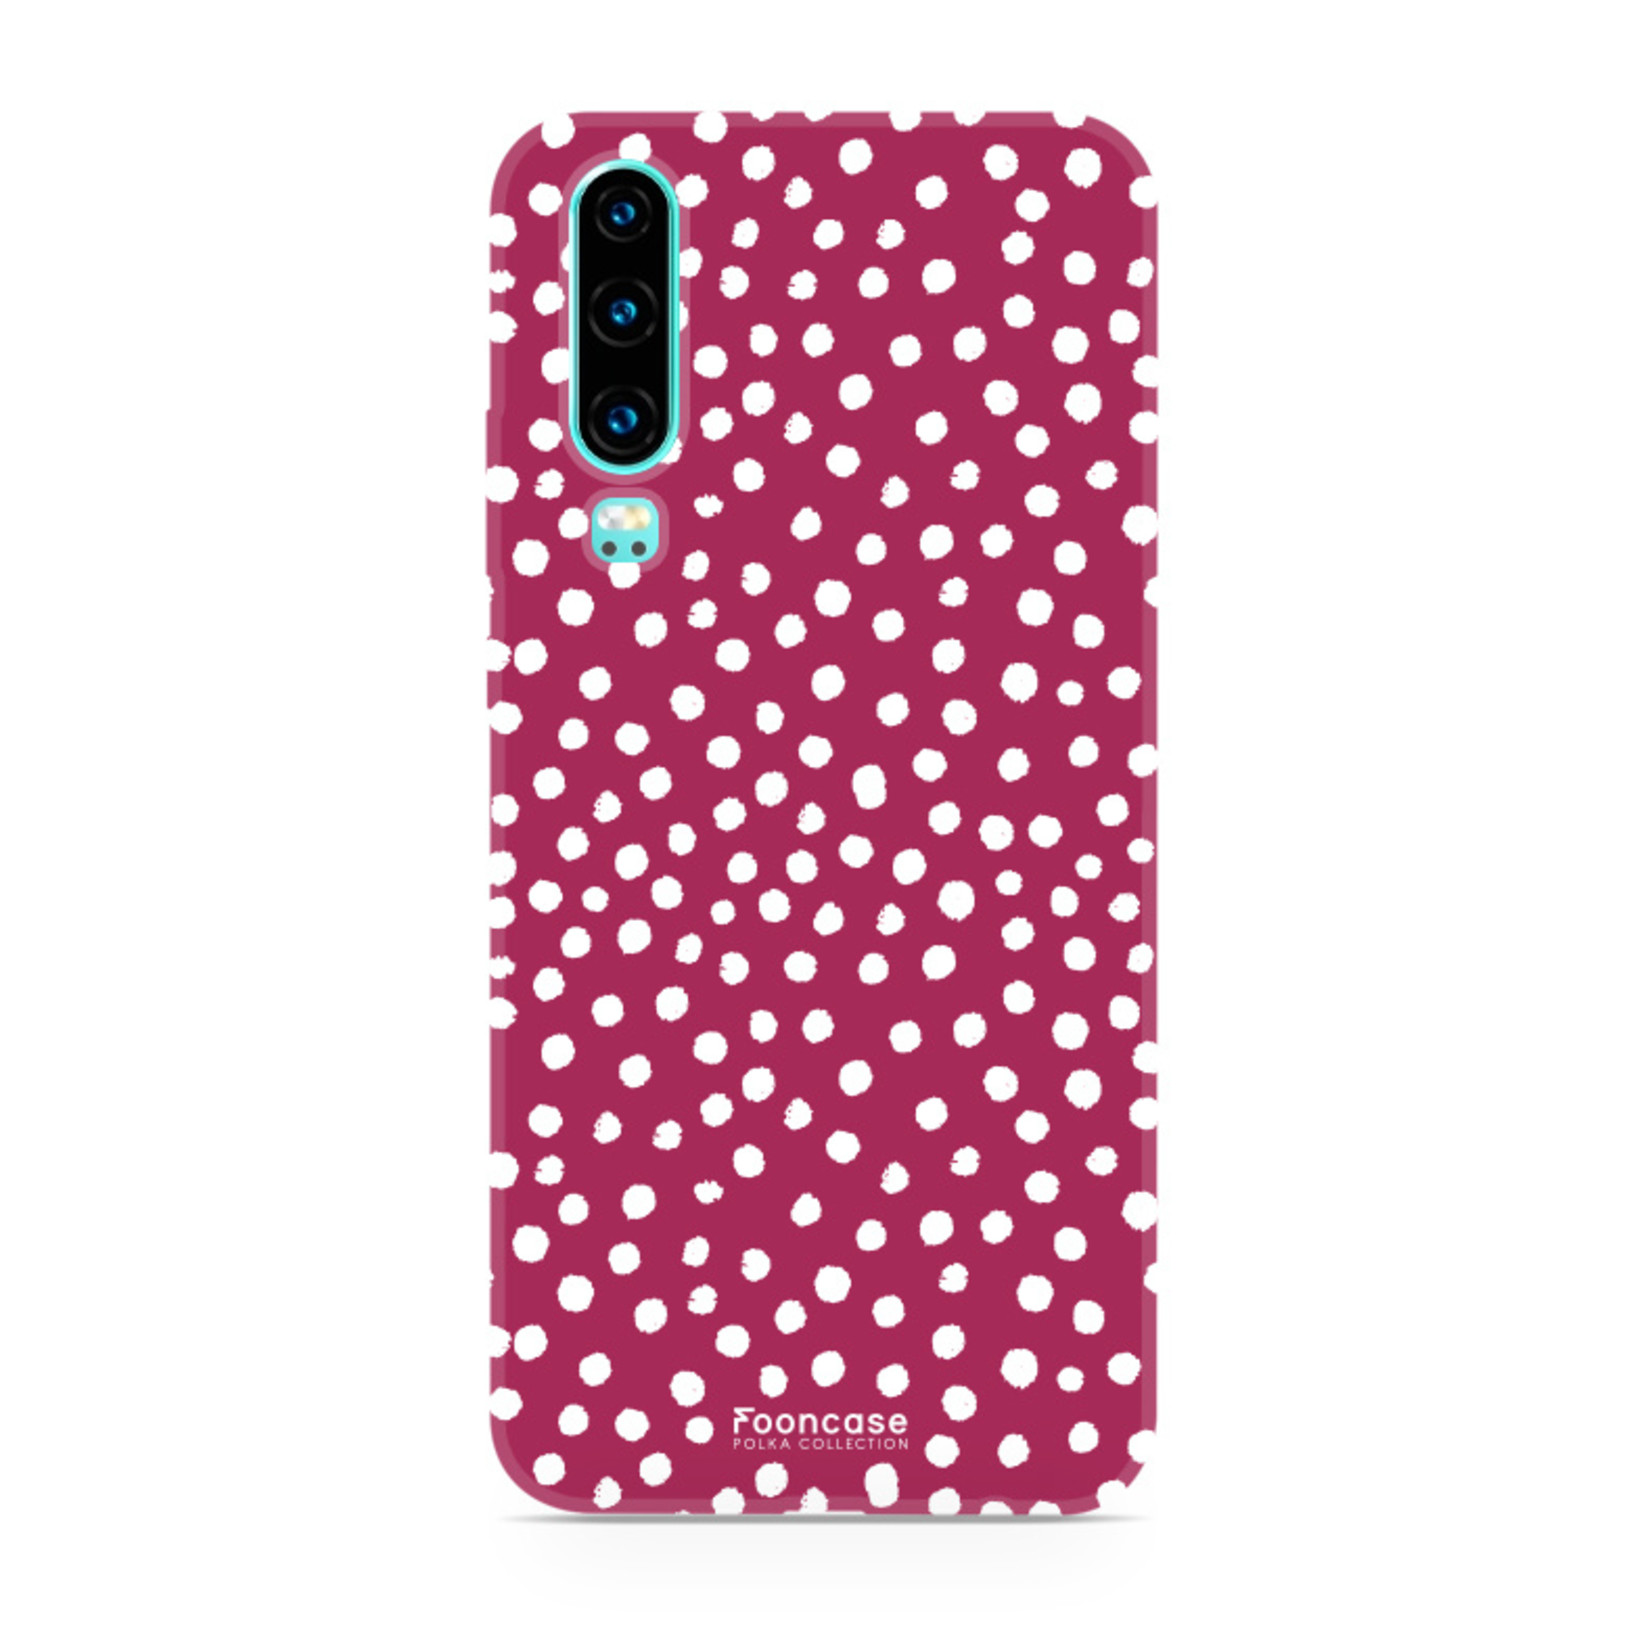 FOONCASE Huawei P30 - POLKA COLLECTION / Rosso